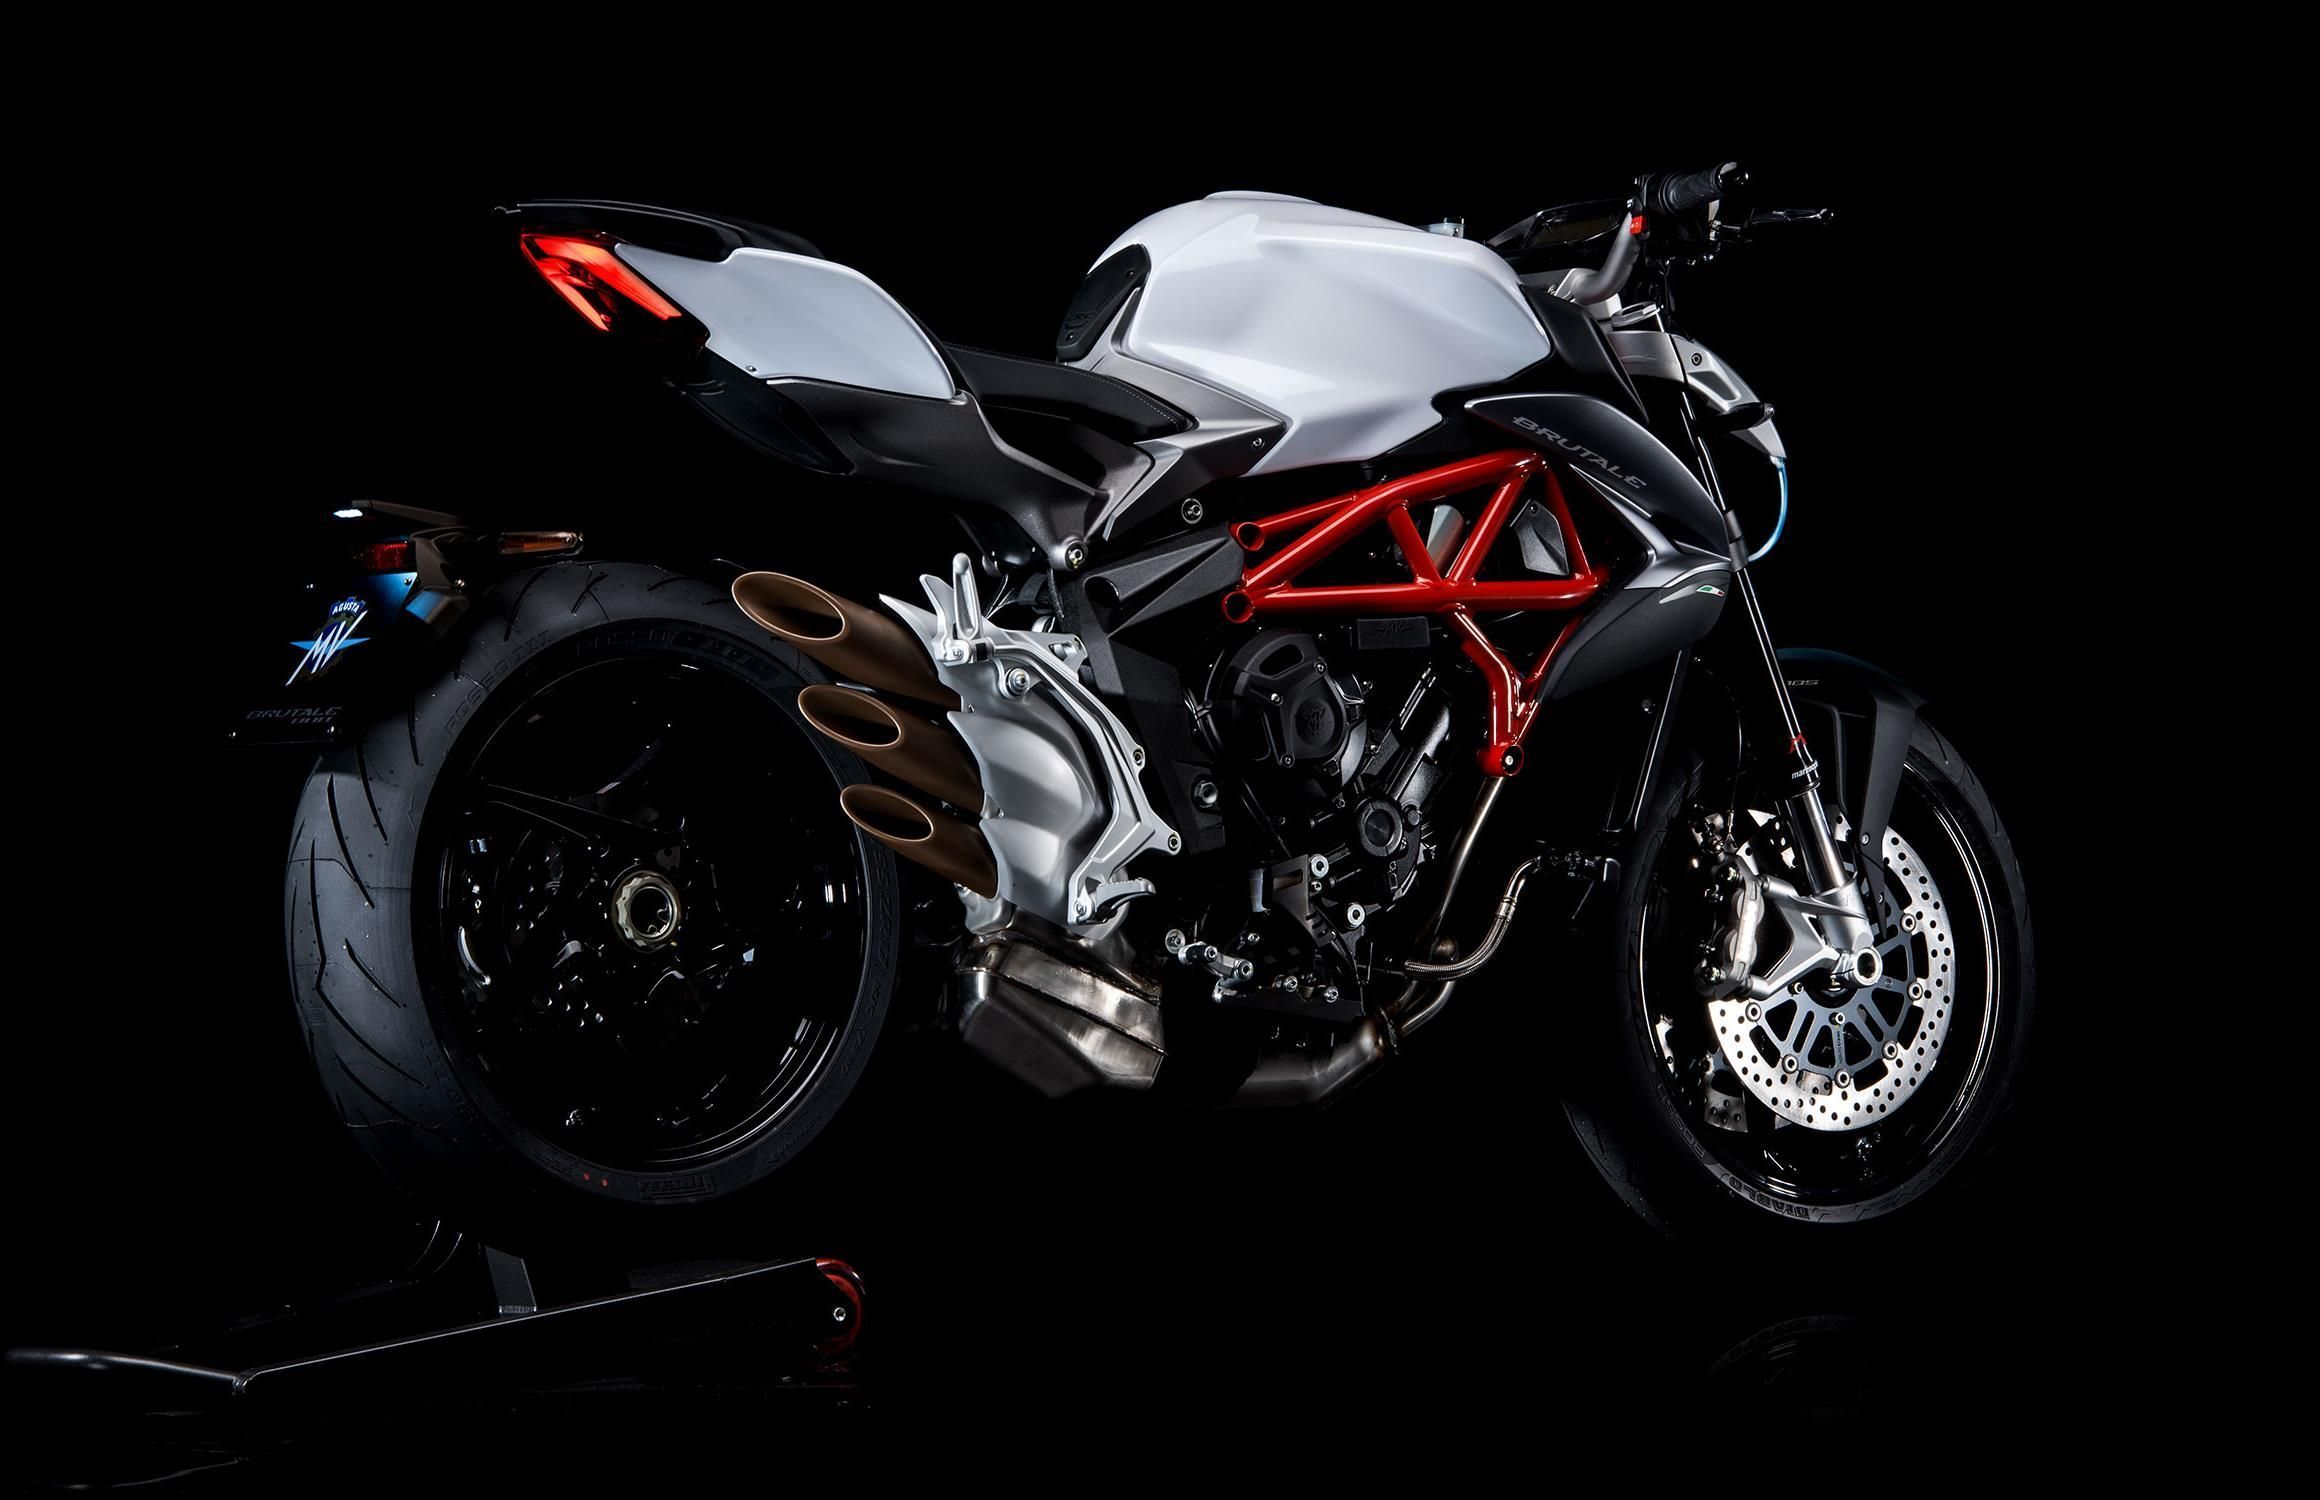 2017 MV Agusta Brutale 800 Launched At Rs 15.59 lakh (ex-showroom, pan-India)